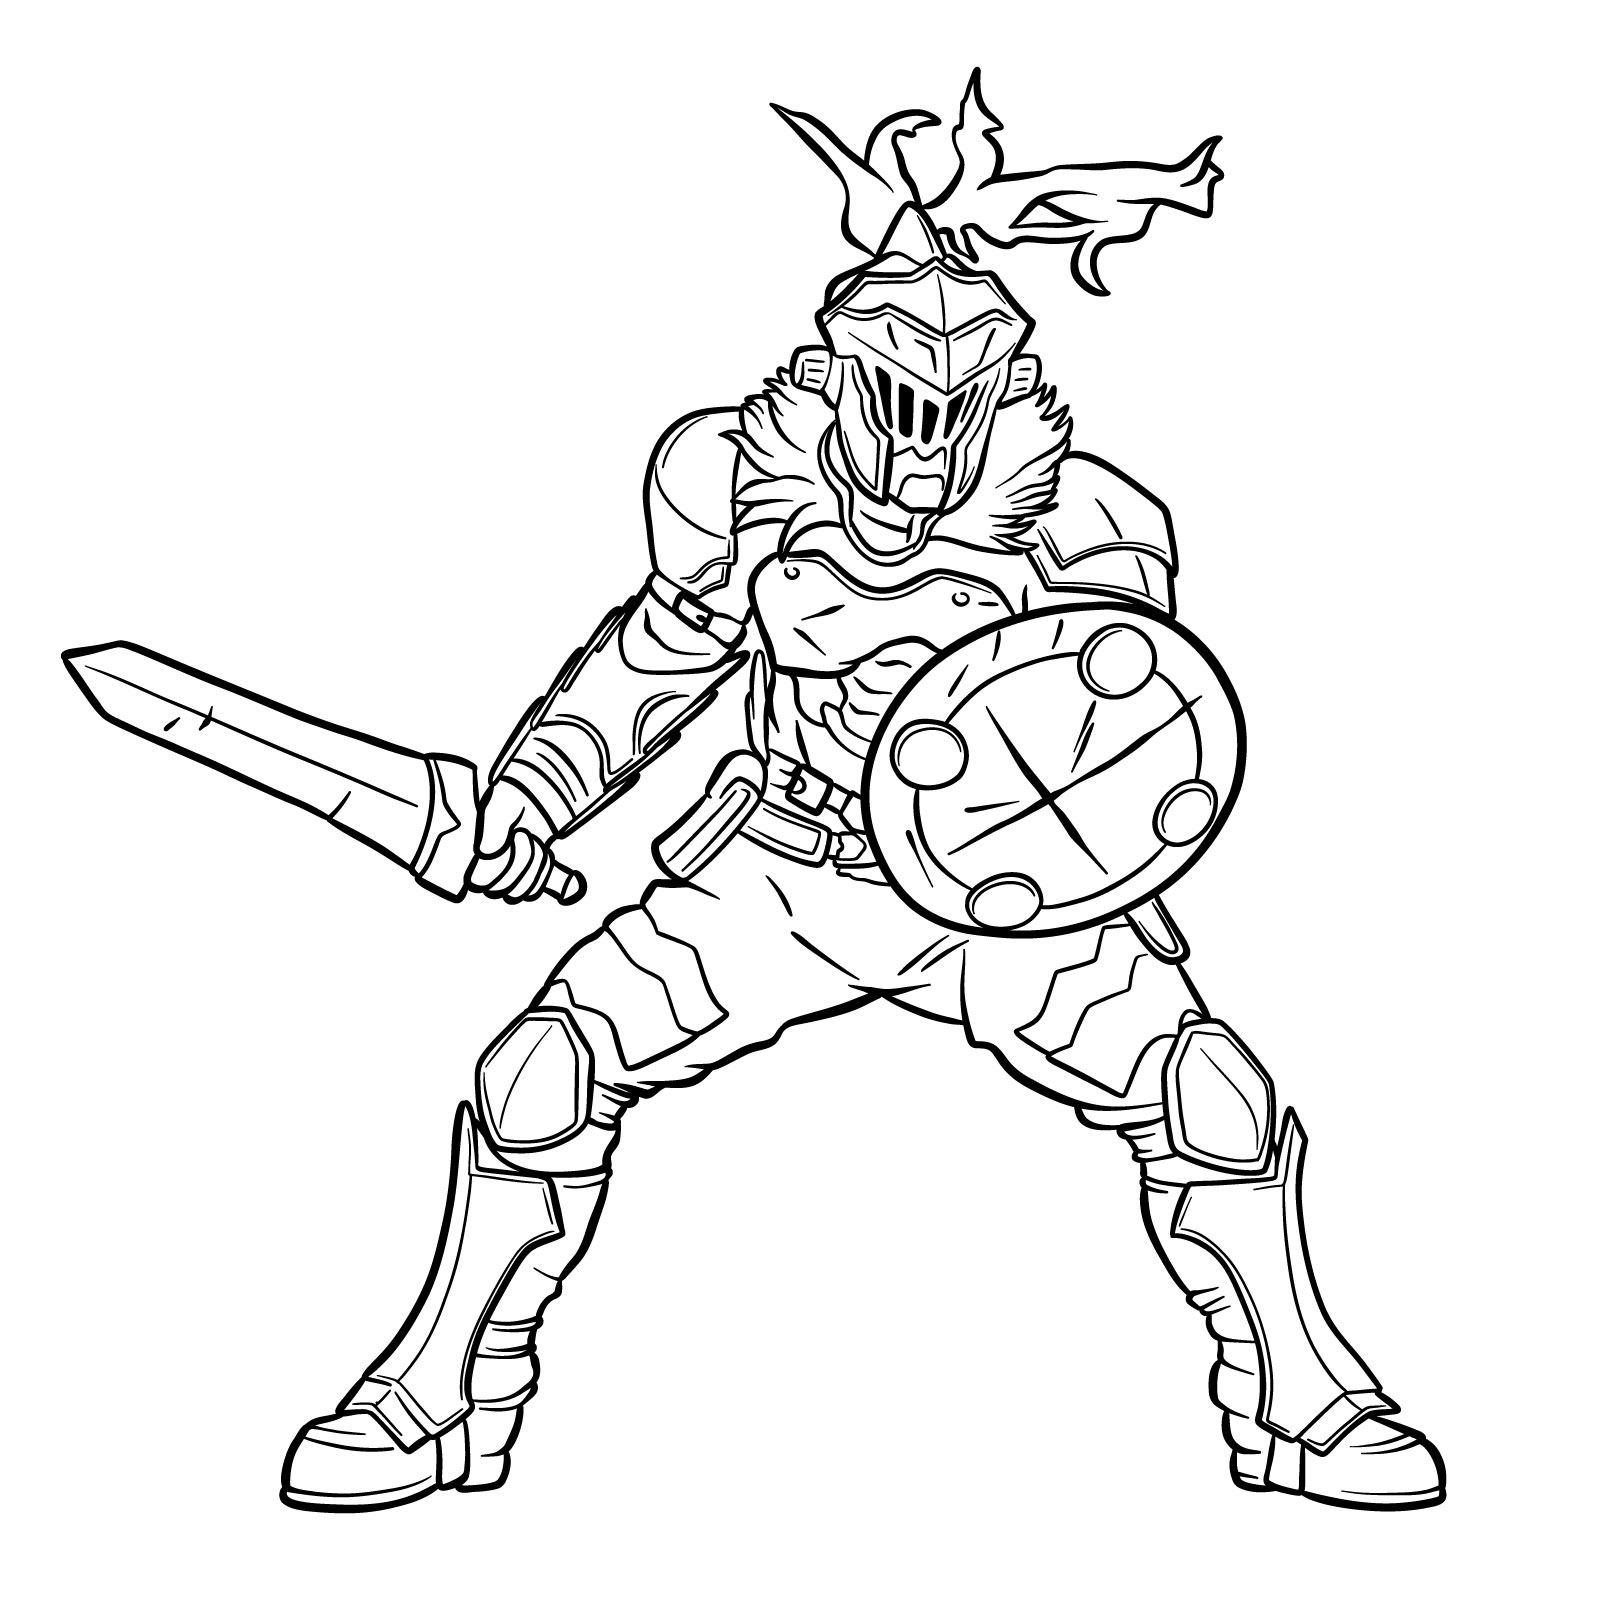 How to Draw Goblin Slayer in battle stance - final step